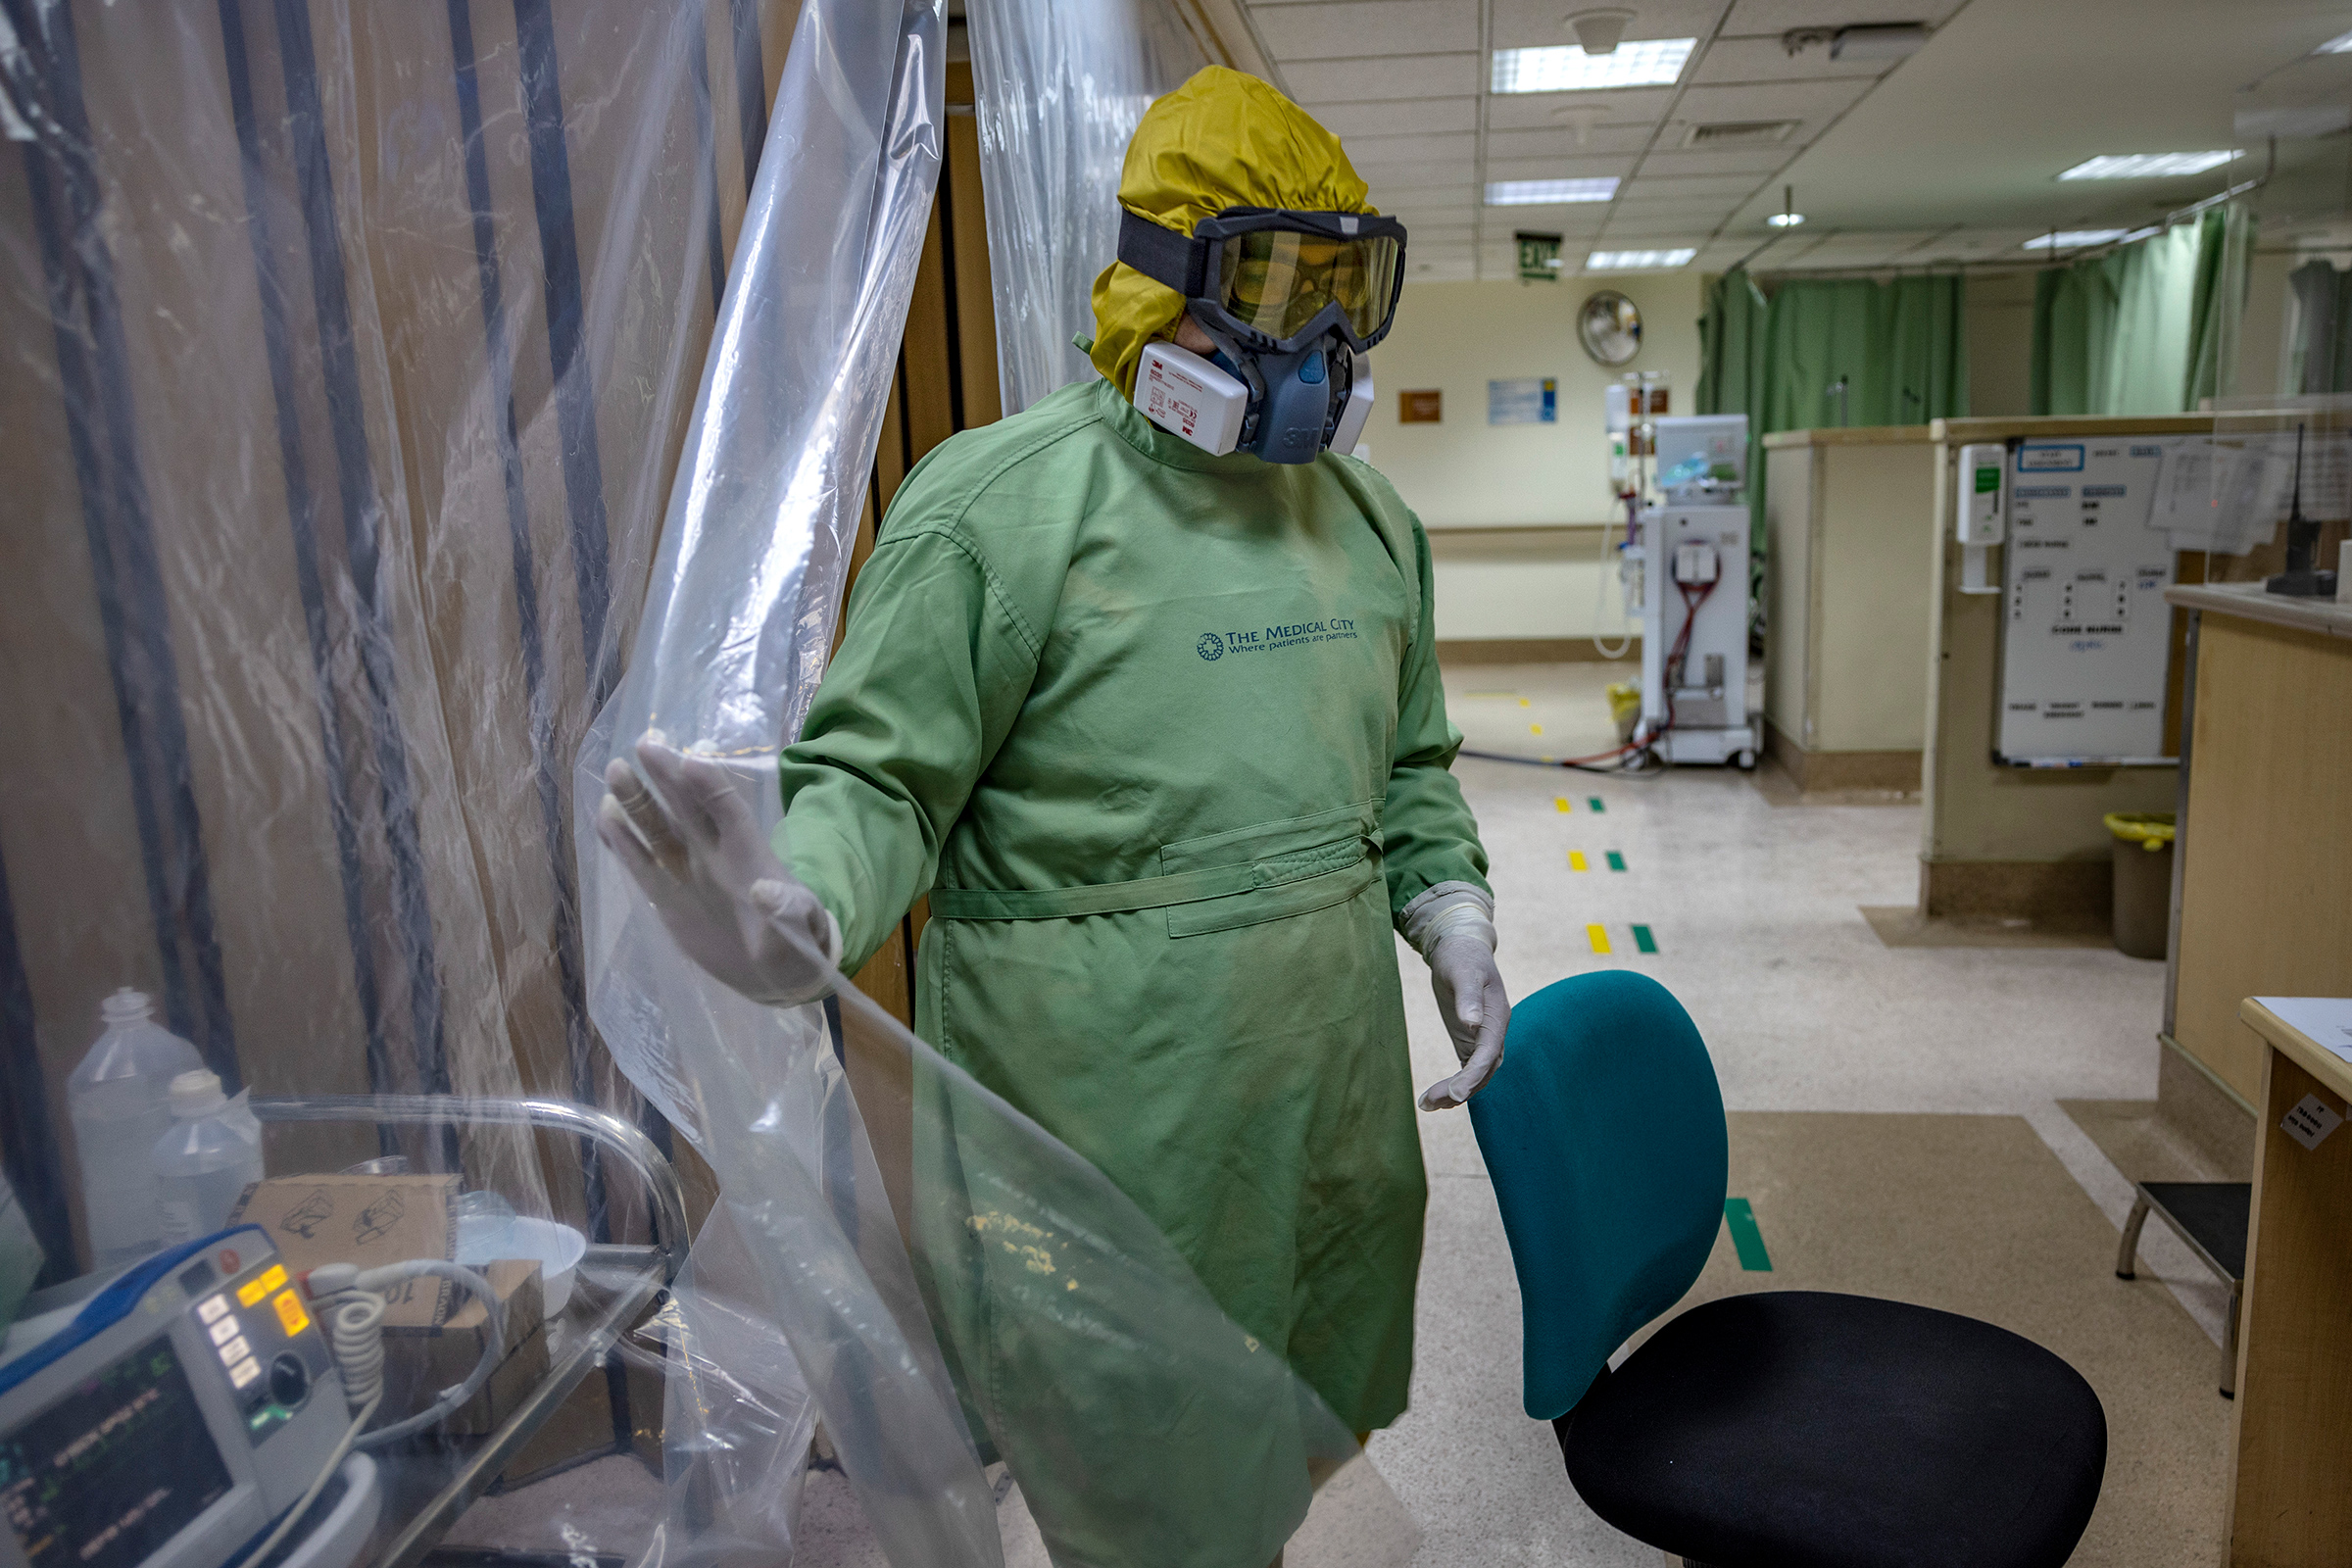 Dr. Alejandro Umali wears personal protective equipment inside the COVID-19 ward on April 26.